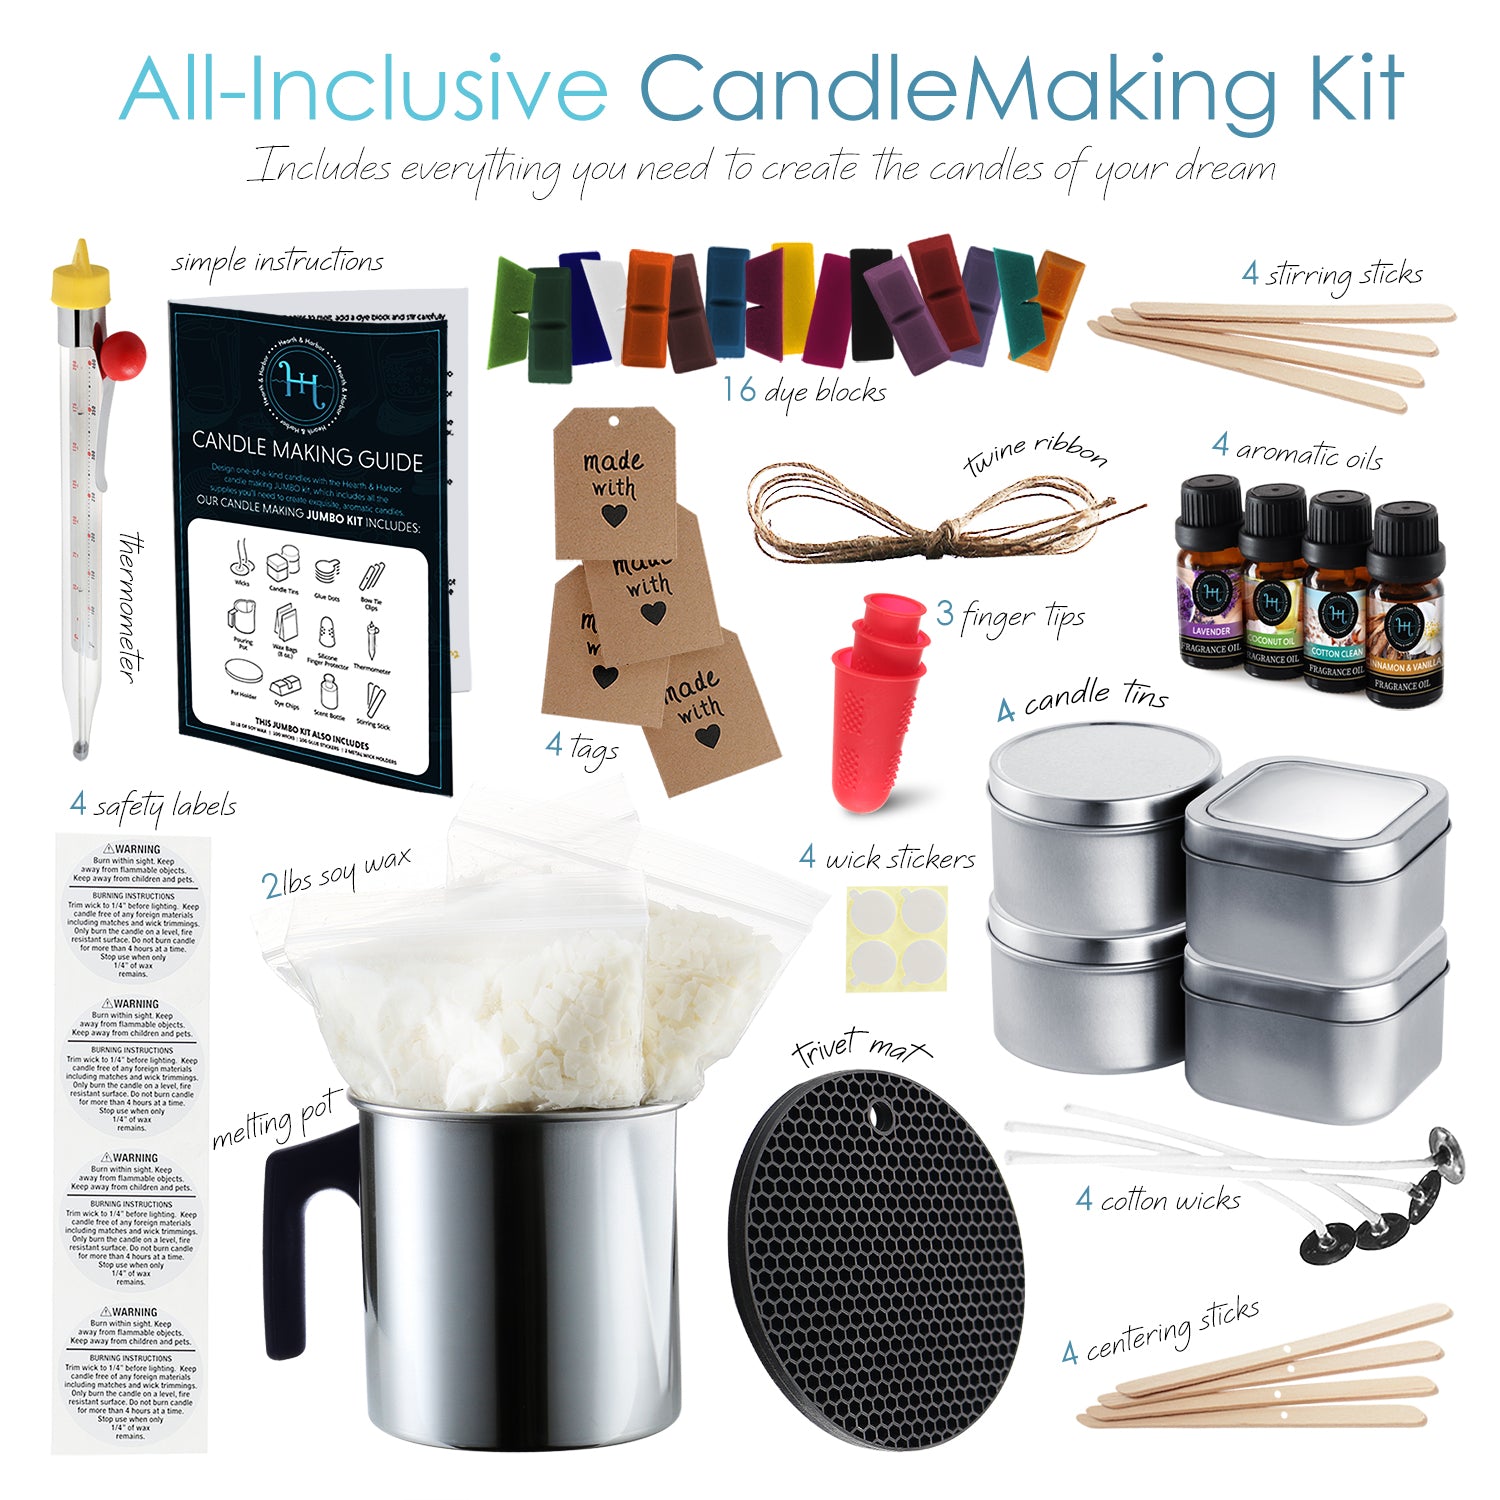 Candle Making For Beginners Series  Part Four: All About Cotton Wicks 